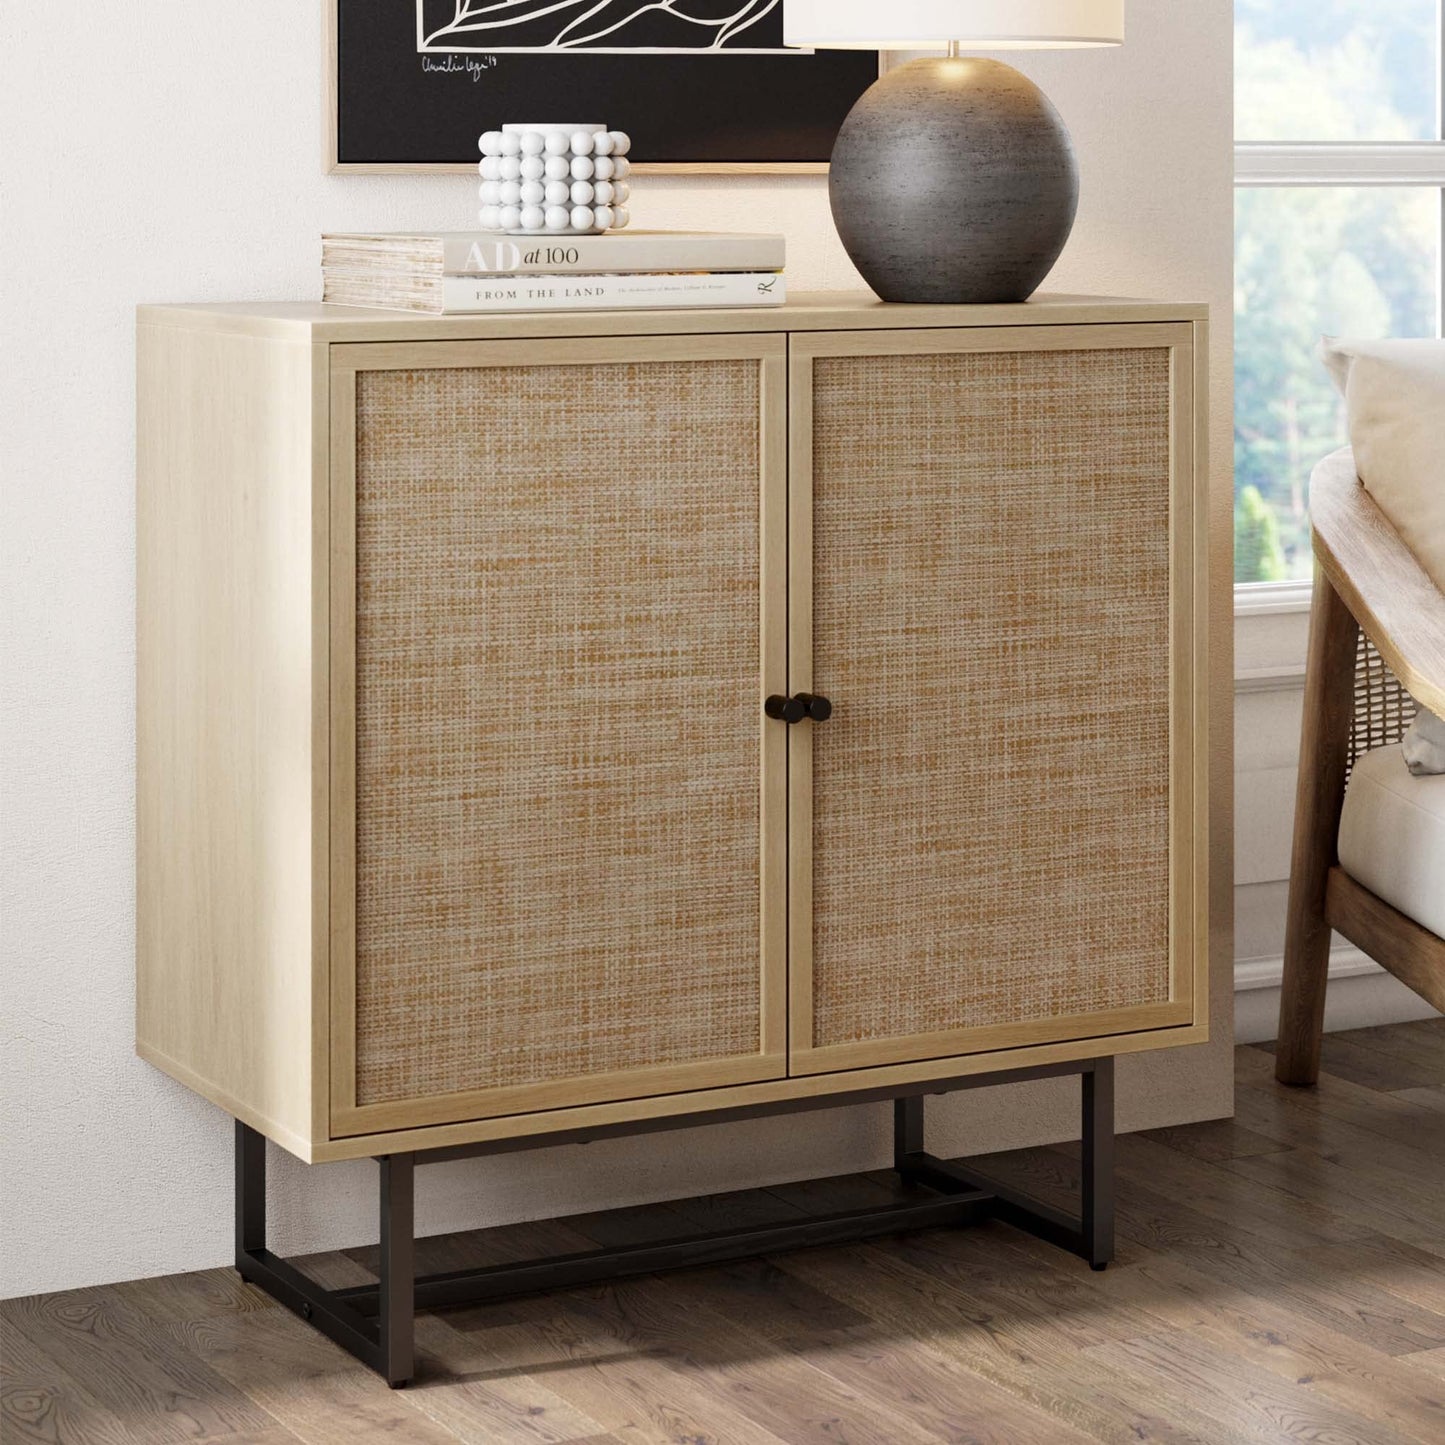 Nathan James Accent Storage Boho Modern Free Standing Buffet Sideboard Cabinet for Hallway, Entryway, Dining Living Room, 1, Light Oak/Black